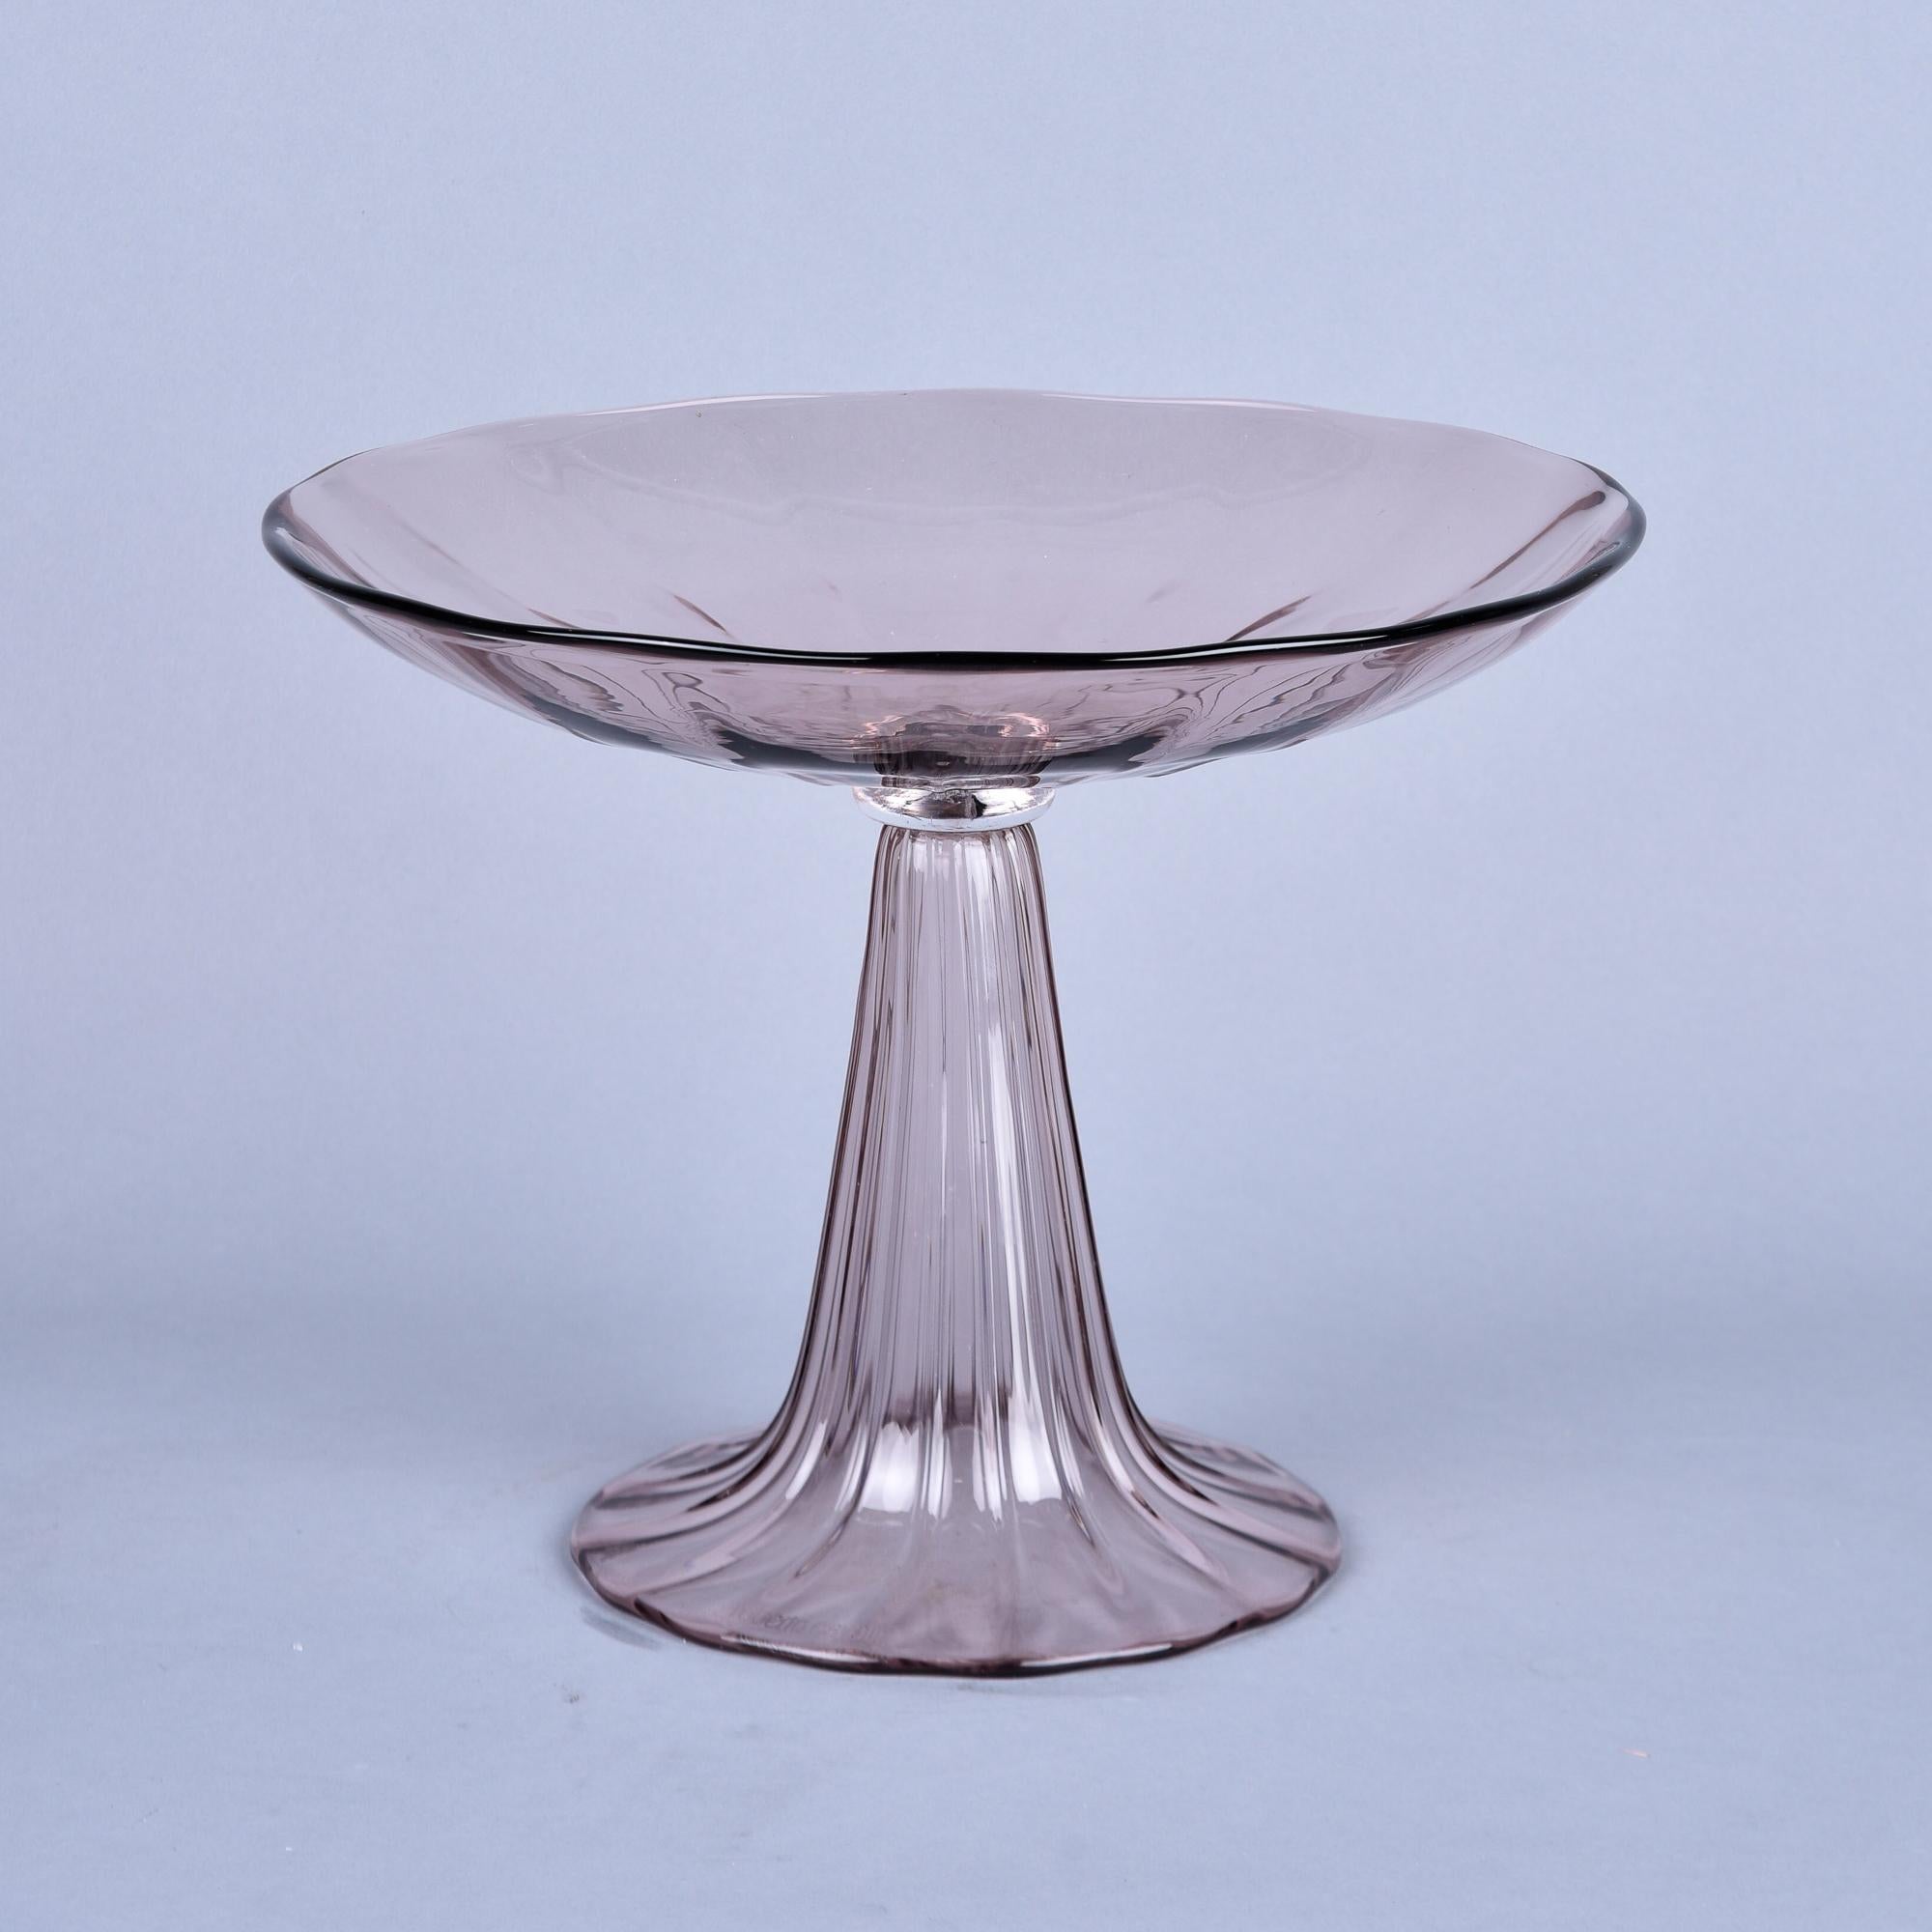 Found in Italy, this circa 2010 Murano glass tazza is marked Roberto Cavalli on the base. This pale amethyst tazza is over 12” high and 15” diameter with subtle ribbing to the surface. No chips, cracks, flaws or repairs found. 

Tazza is in